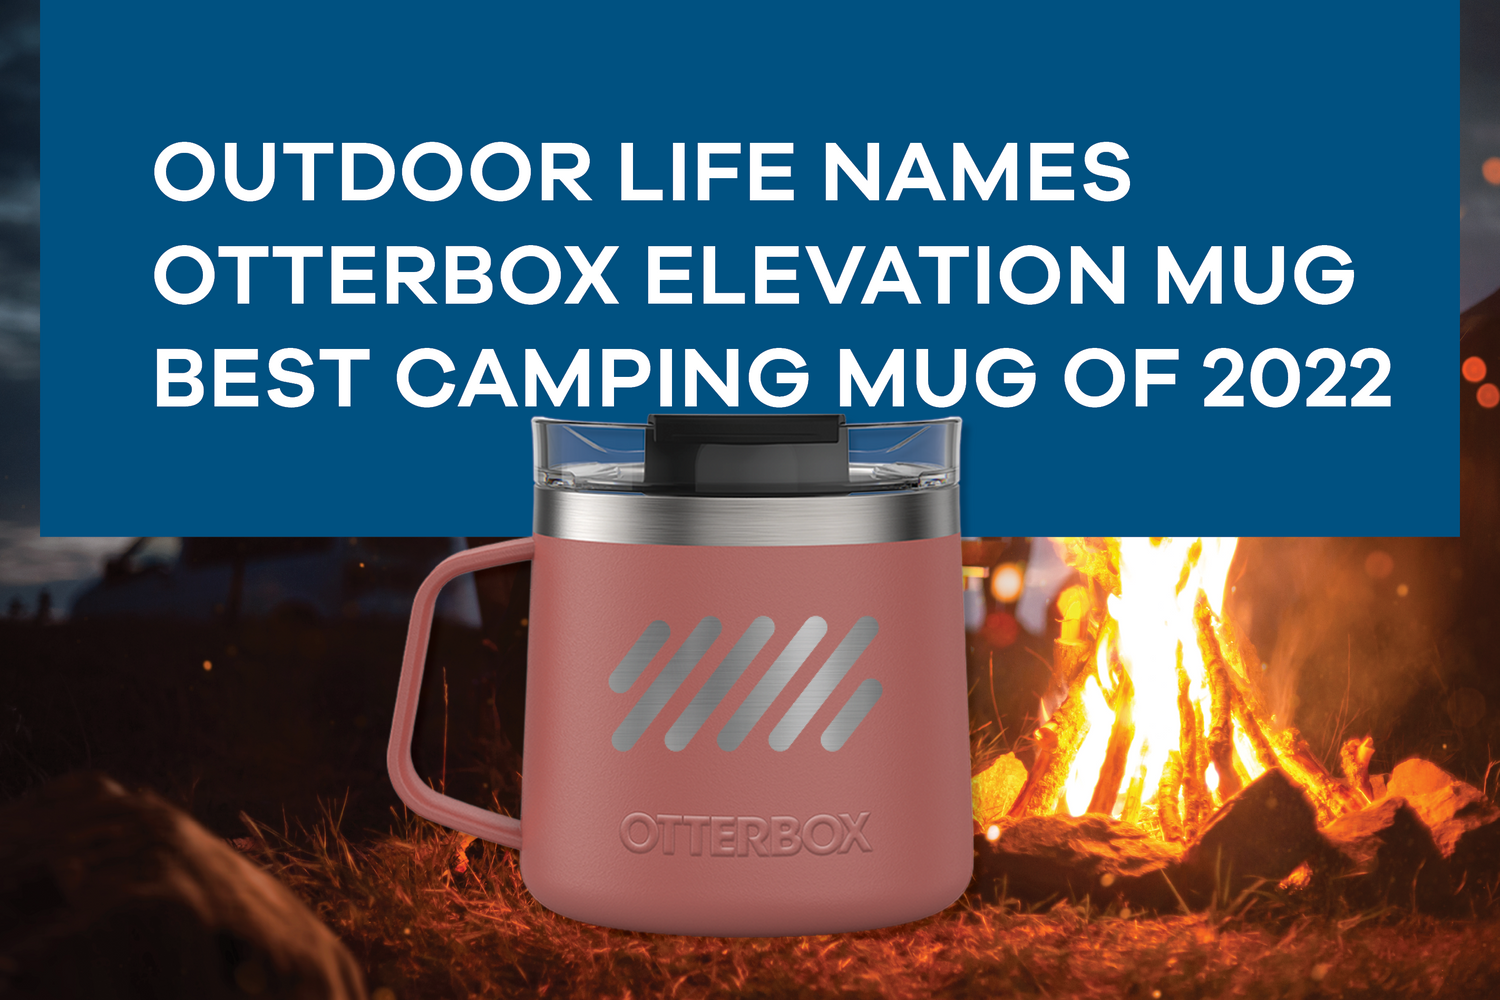 Outdoor Life Names One of Our Brands Best Camping Mug